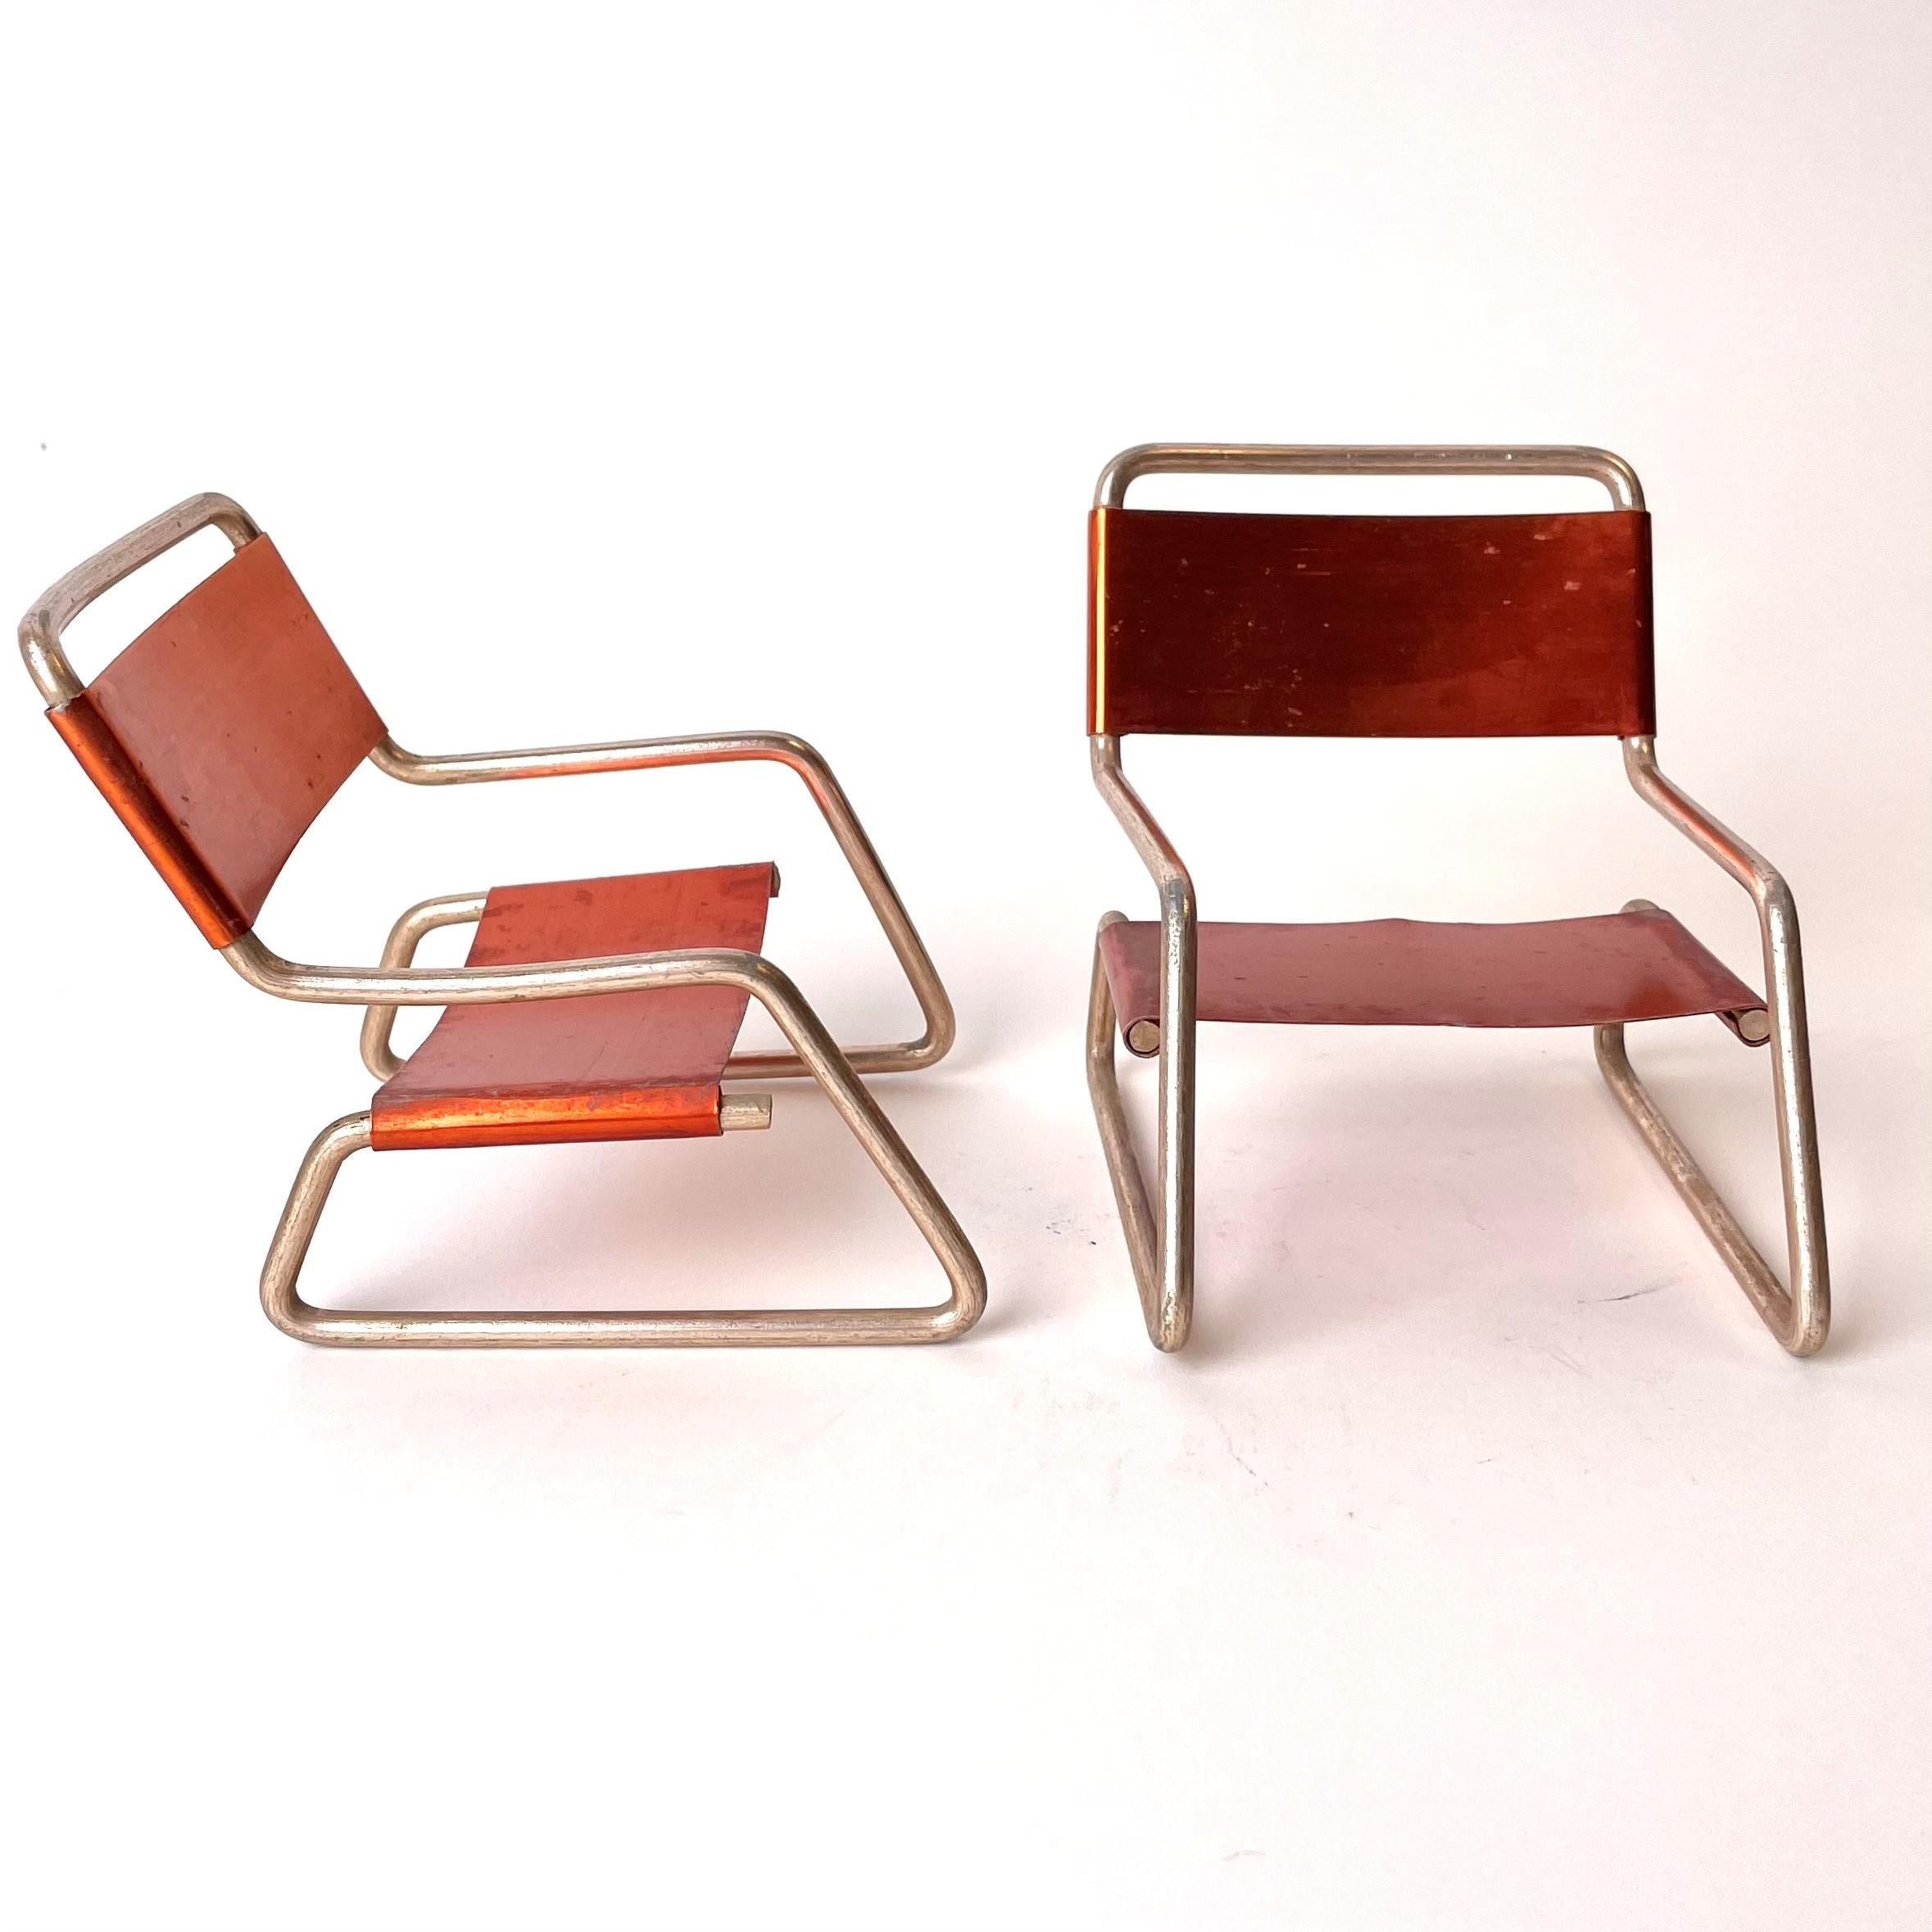 Charming Miniature Seating Group in Bauhaus Style from the 1930s-1940s In Good Condition For Sale In Knivsta, SE